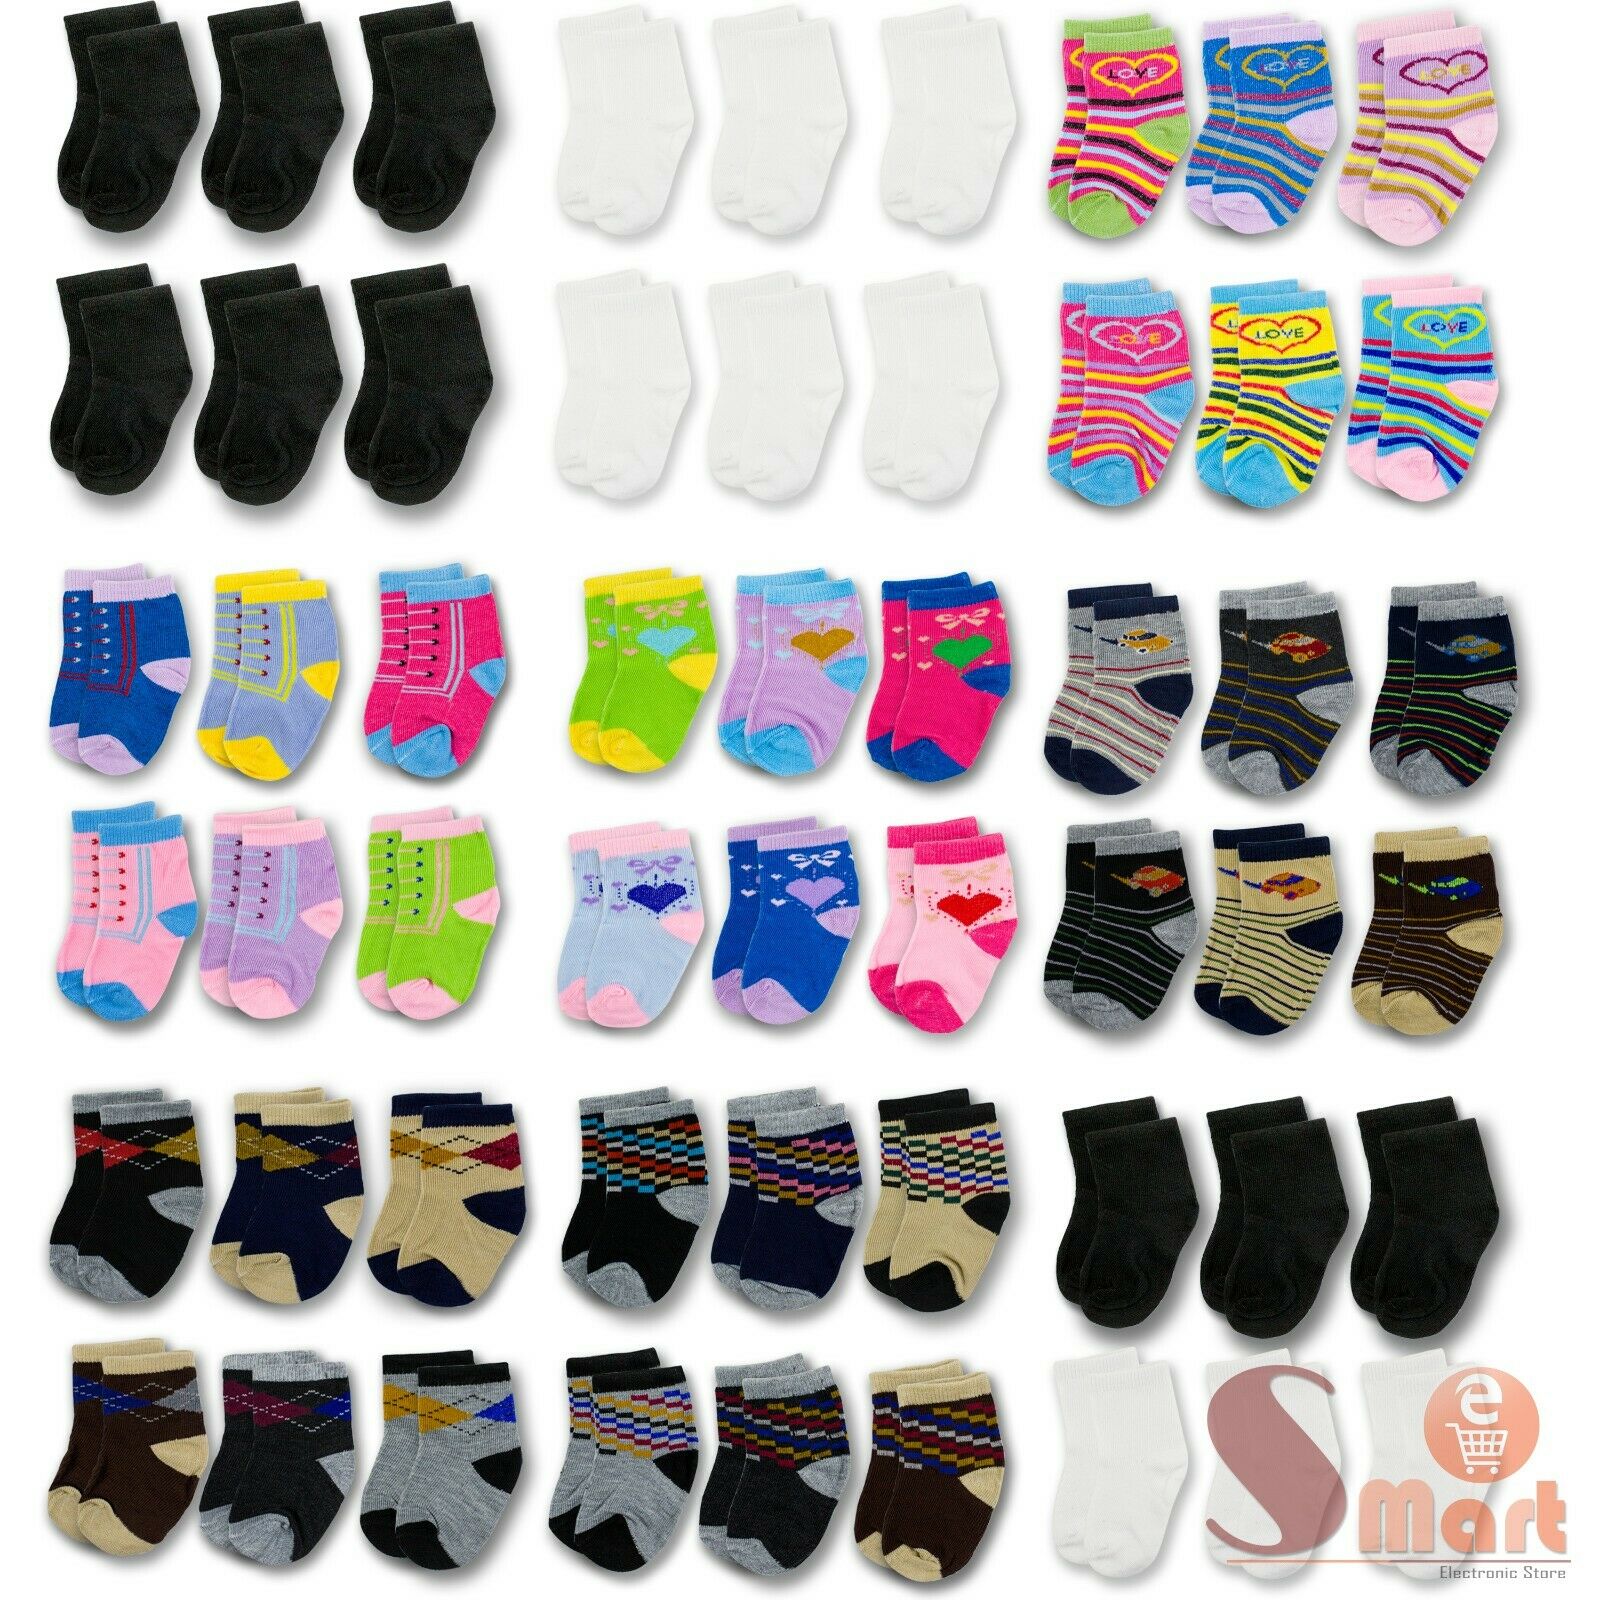 12 Pairs Multi Color Newborn Baby Kids Infant Toddler Crew Soft Socks 0-24 Month